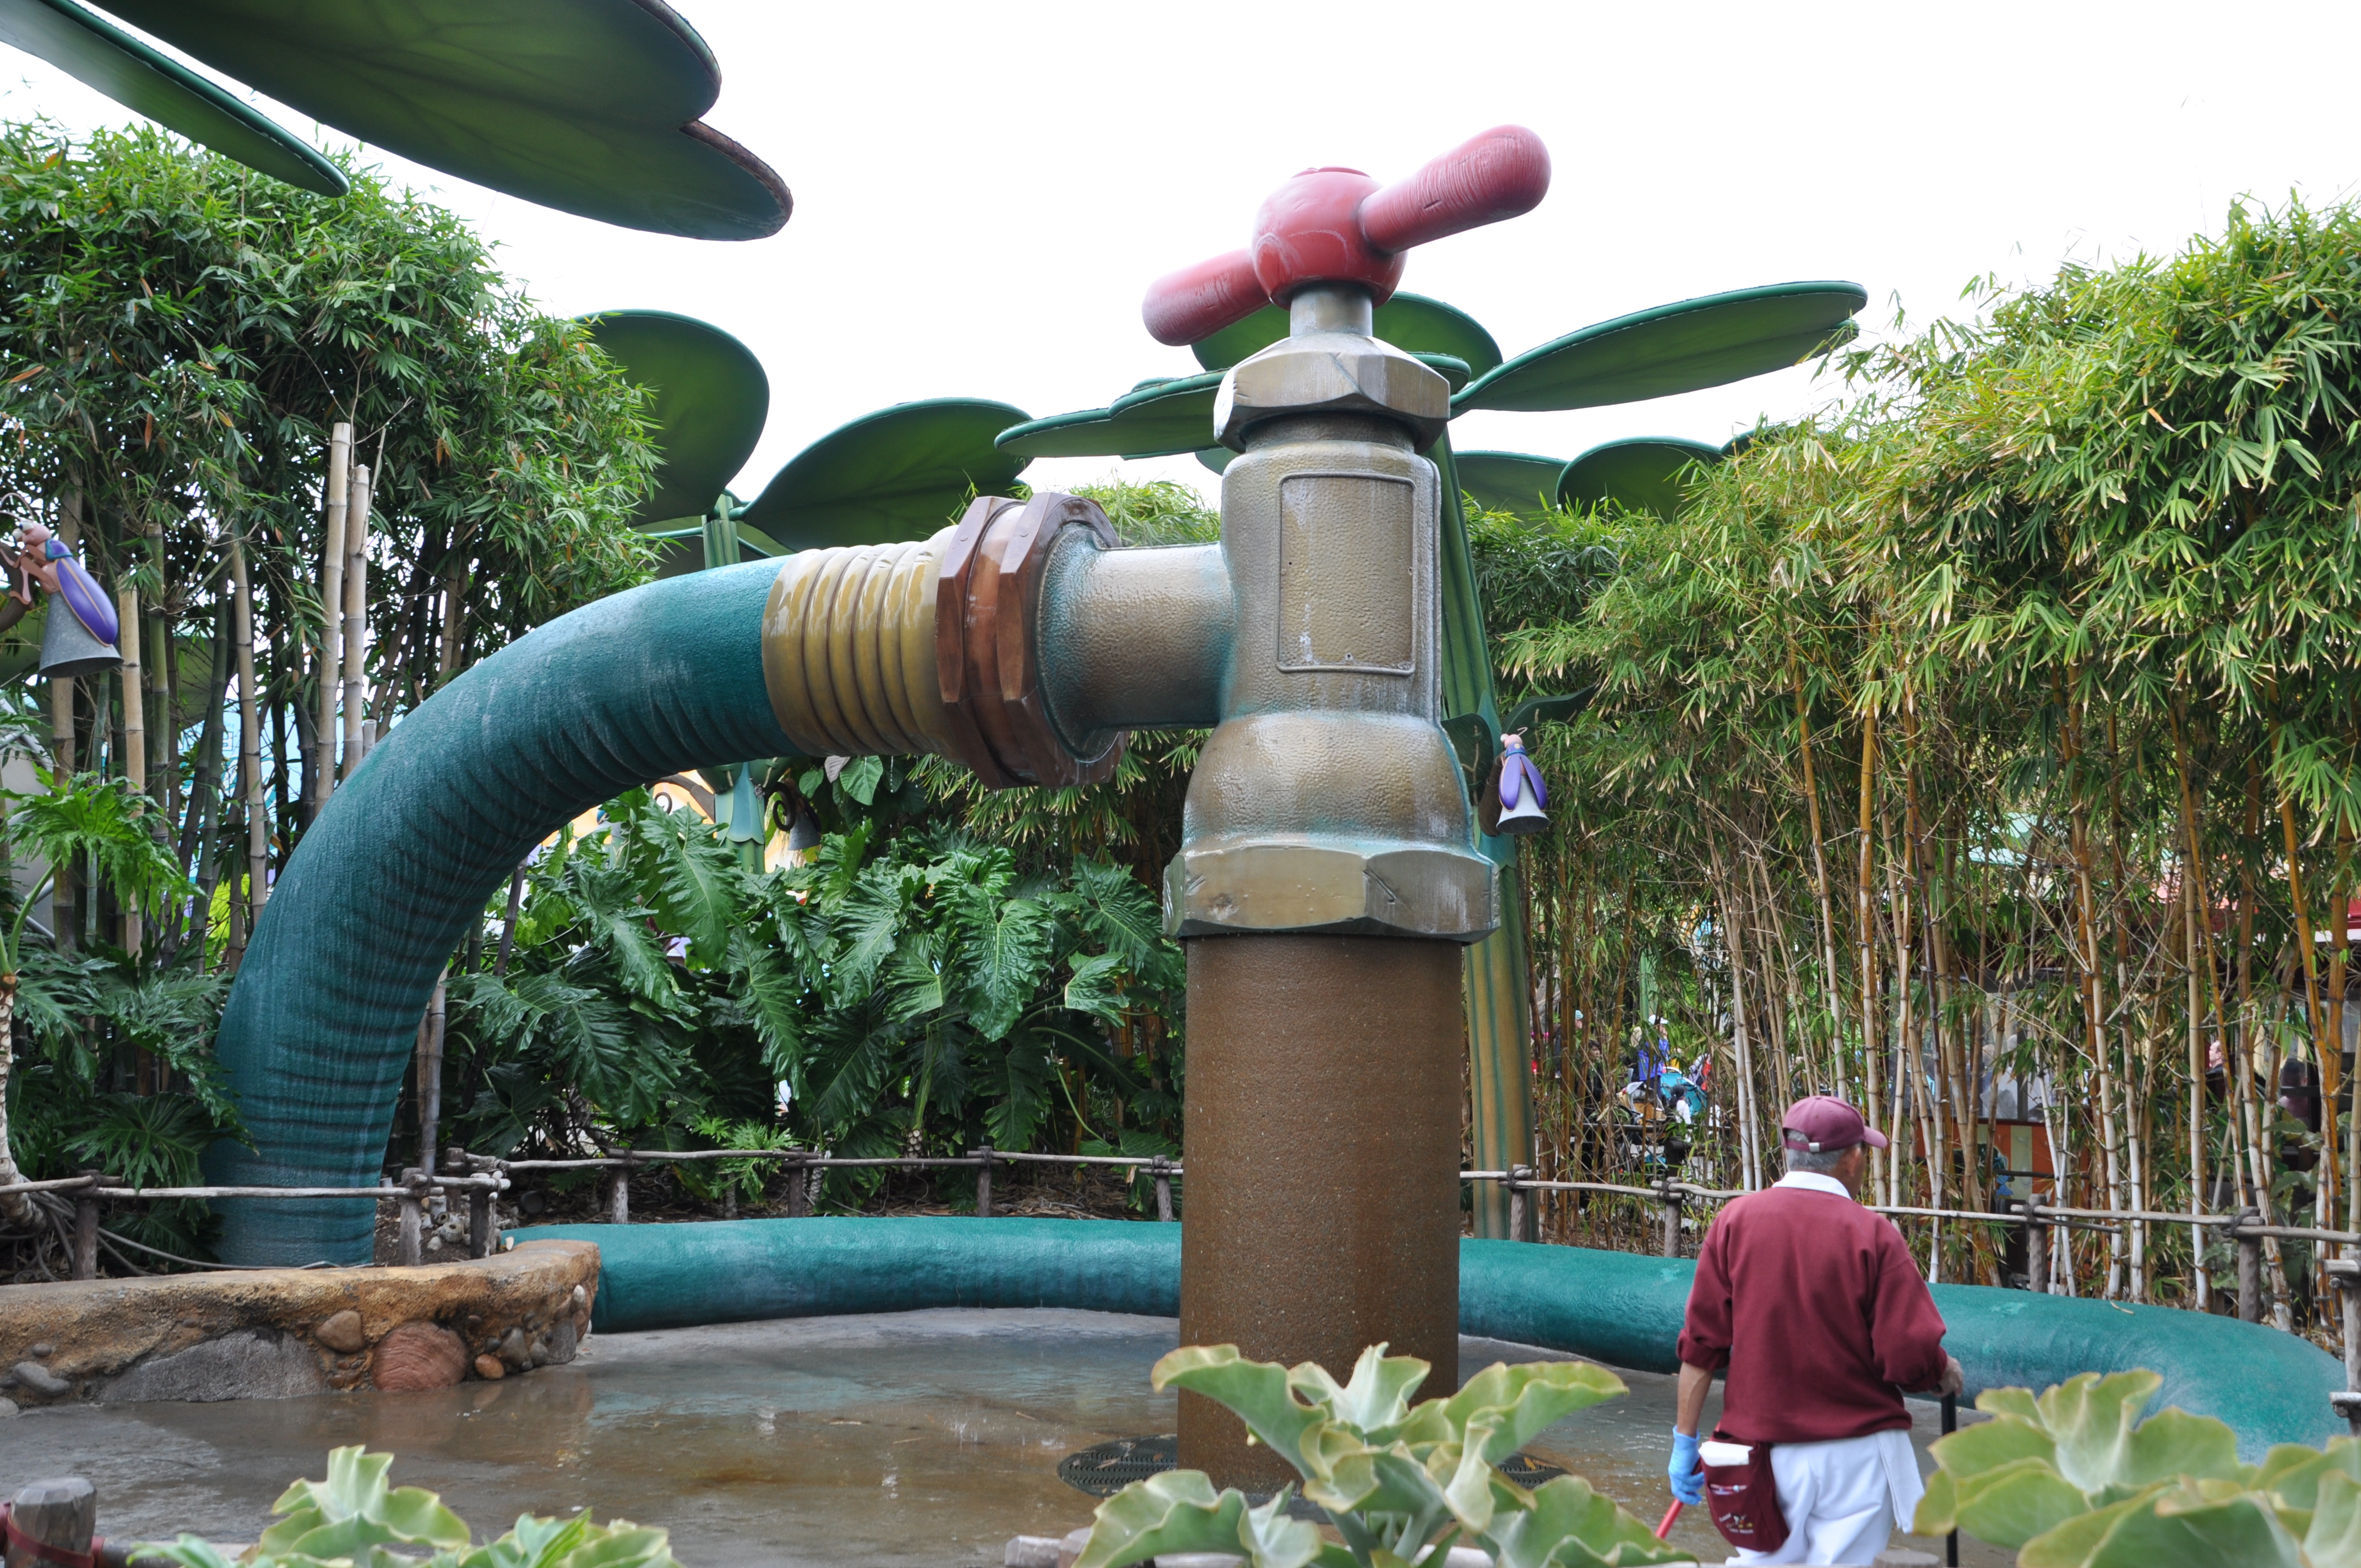 In A Bug's Land, the landscape had overlarge items to make one feel bug-sized.